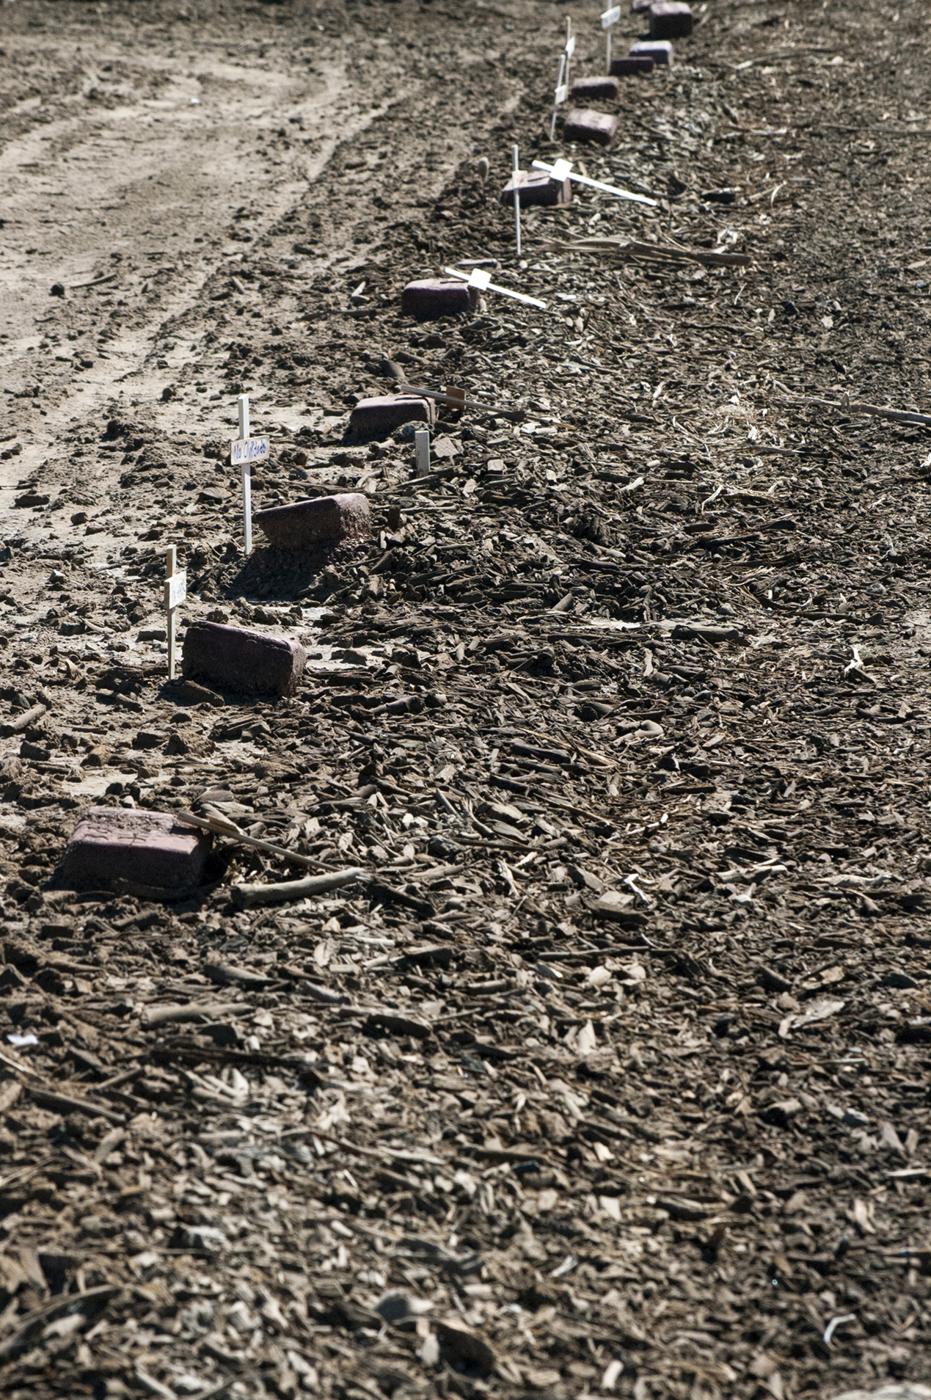 Line Up Of Grave Markers at the Migrant Cemetary Plot | Buy this image